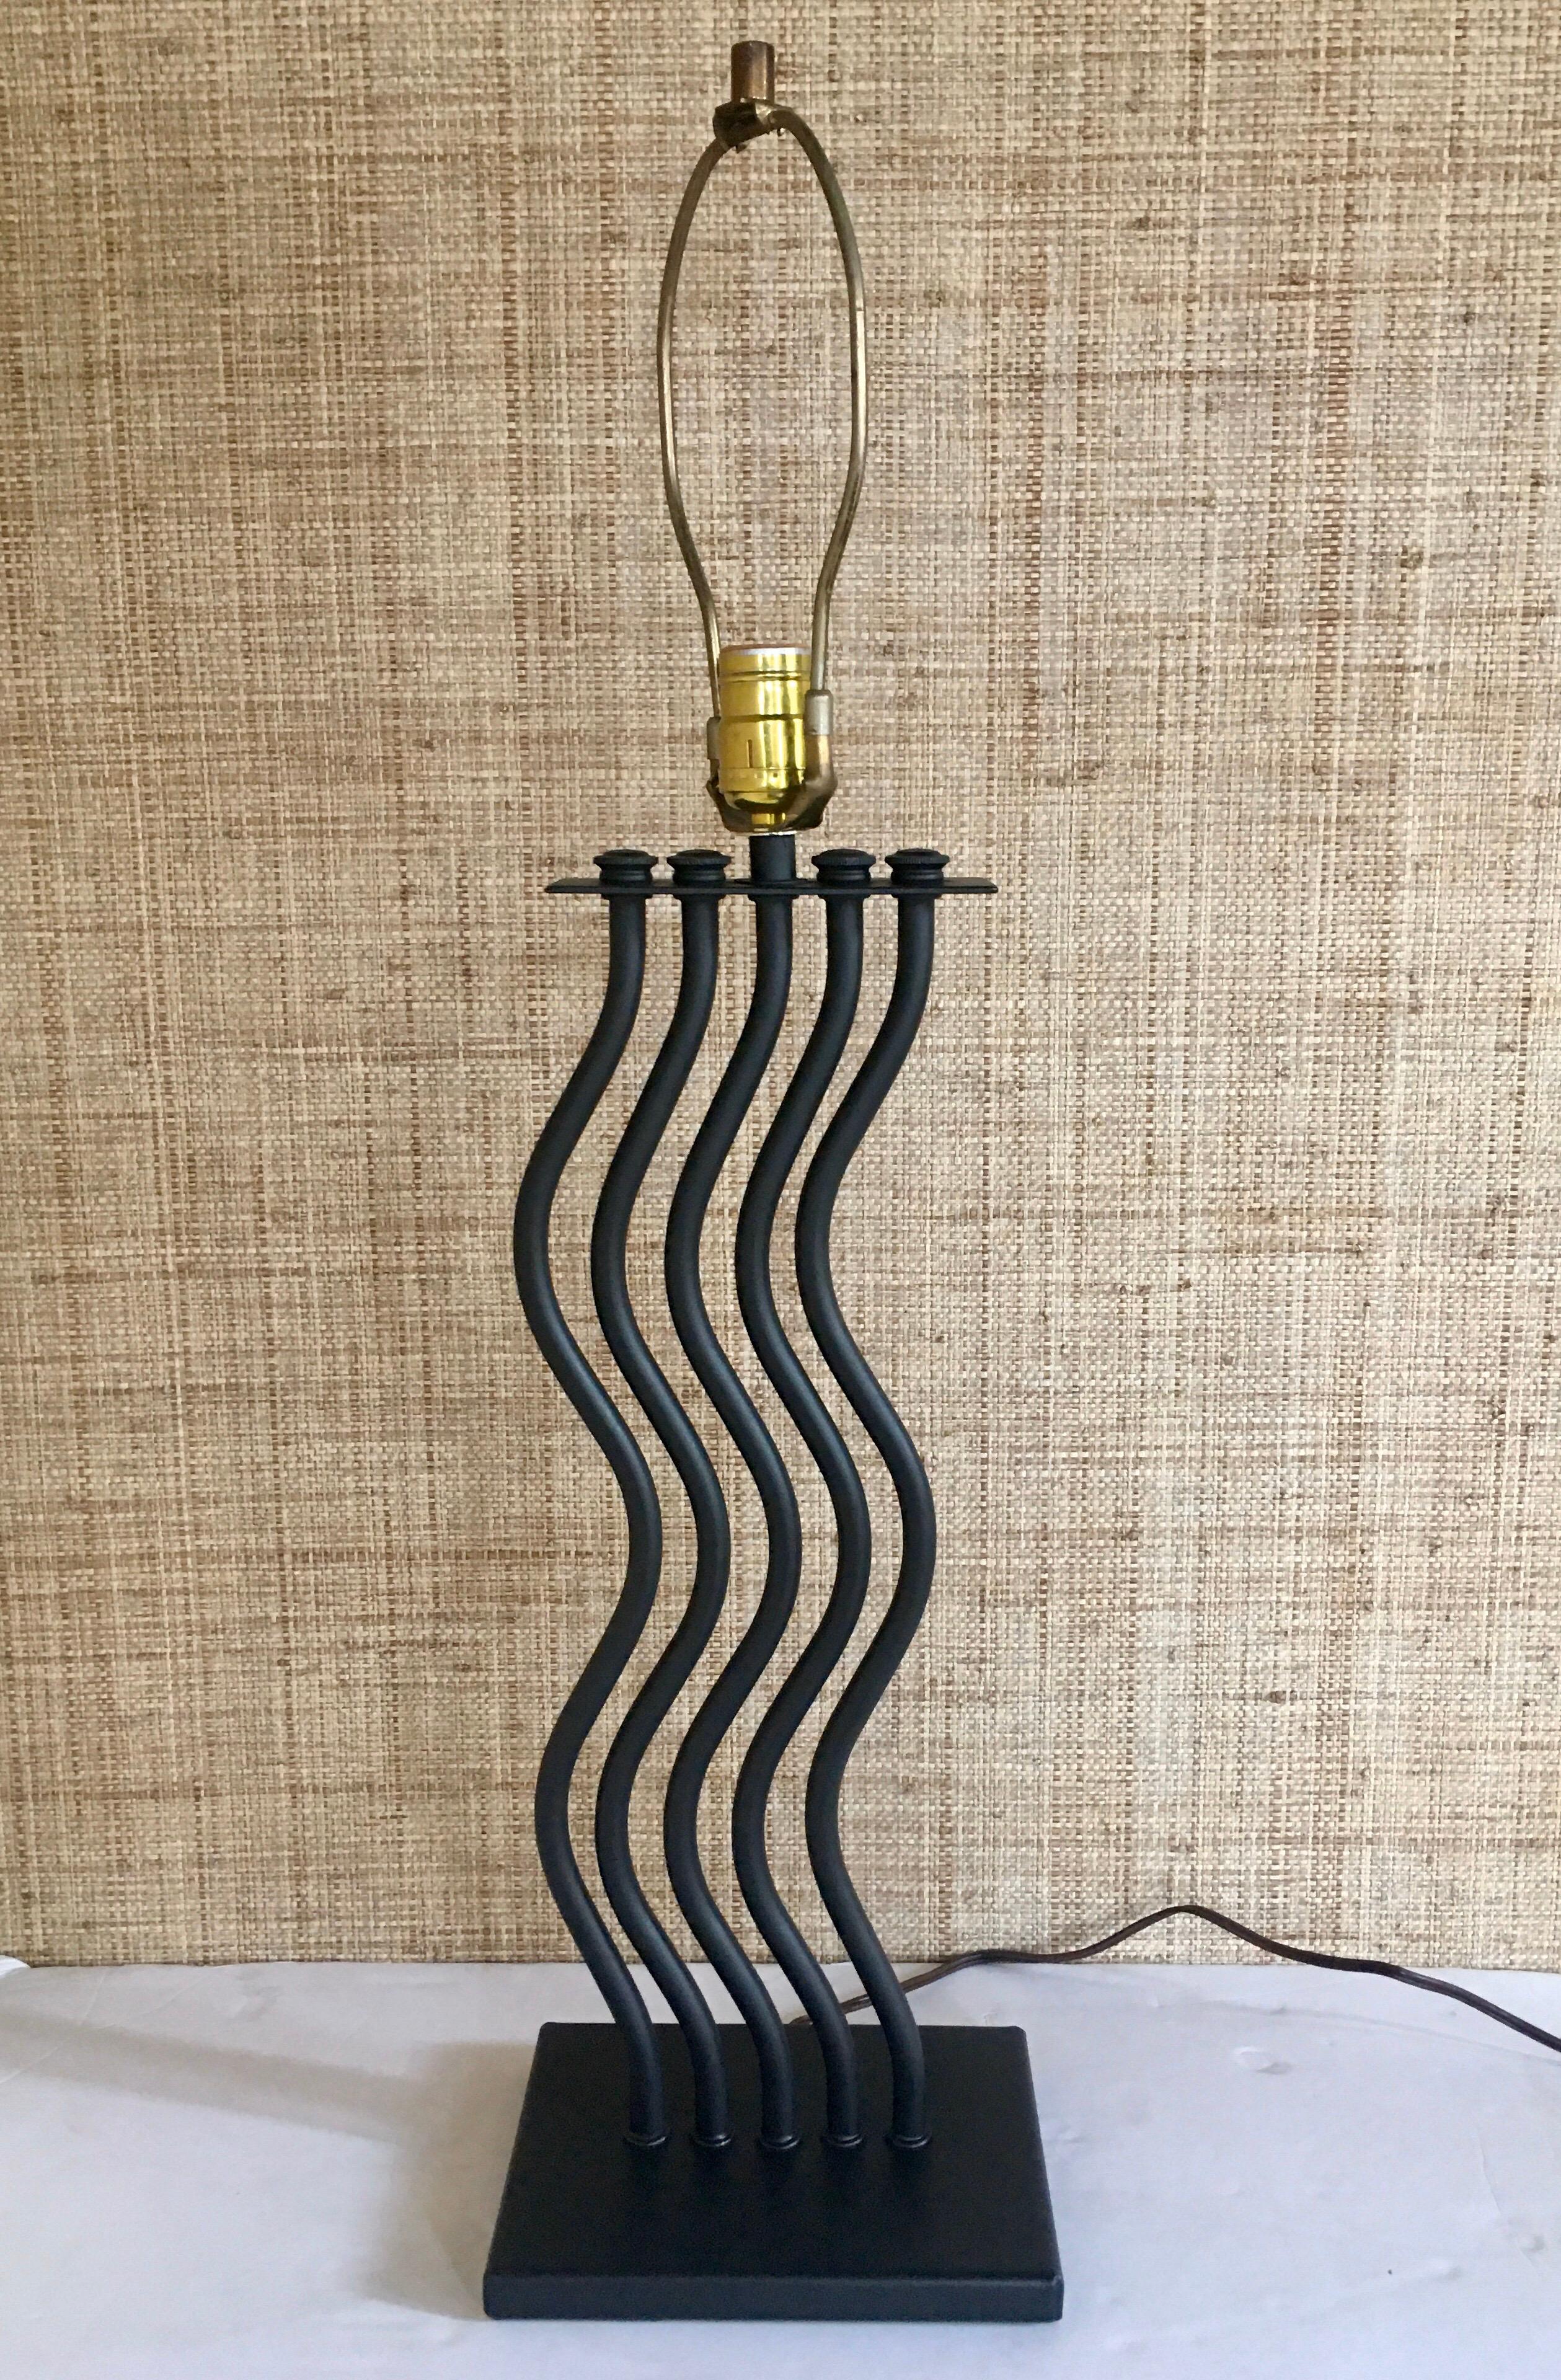 1980s Postmodern Memphis style table lamp. Sculptural design features a series of curved metal tubular bars in a powder coated matte black finish. Lamp shade not included. 

23H to socket.
30.5H to finial.